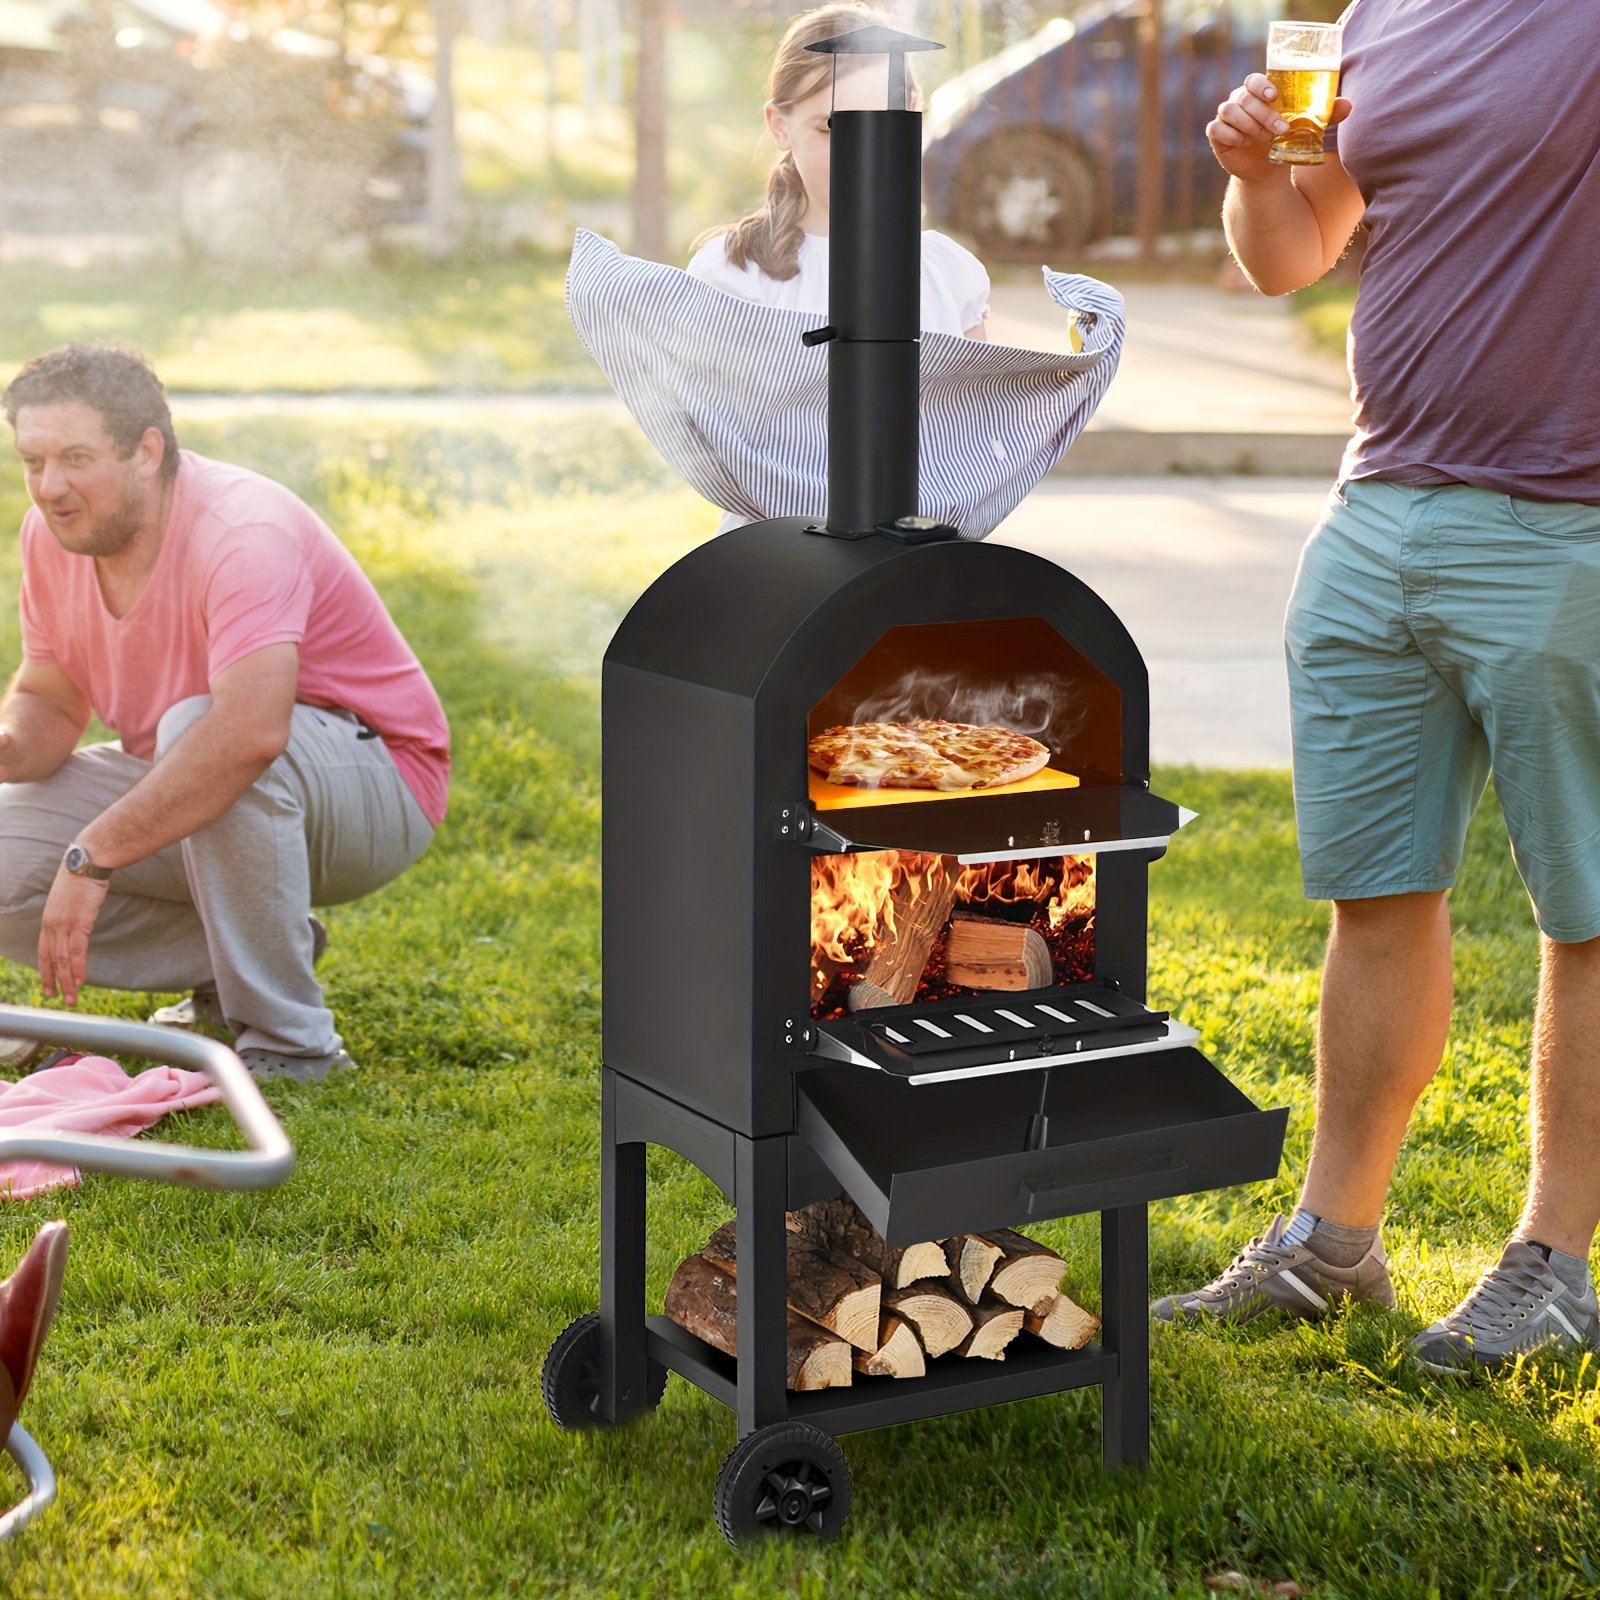 1pc Outdoor Pizza Oven Wood Fire Pizza Maker Grill, Pizza Stone & Waterproof Cover, High Efficient, Suitable Different Occation